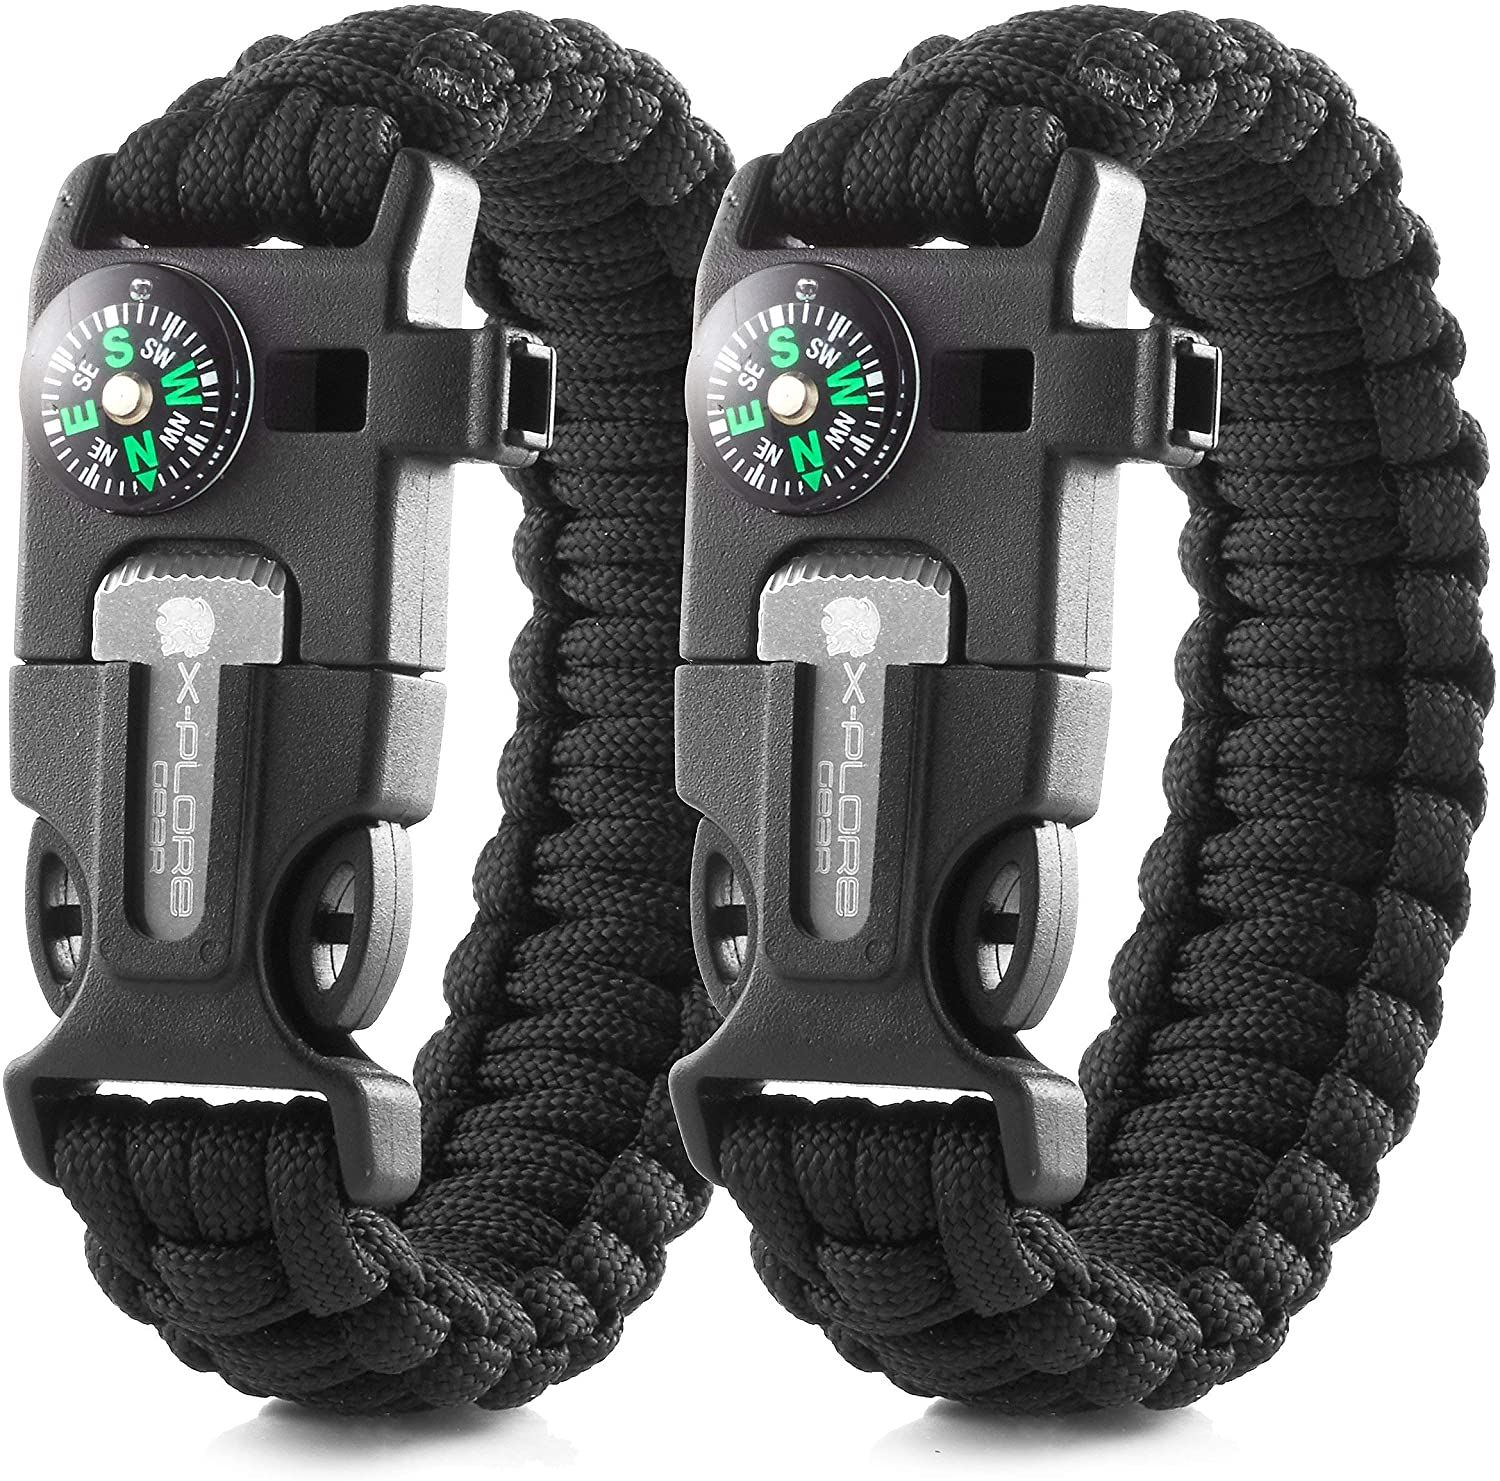 Emergency Paracord Bracelets | Set of 2| the Ultimate Tactical Survival Gear| Flint Fire Starter, Whistle, Compass & Scraper | Best Wilderness Survival-Kit for Camping/Fishing & More